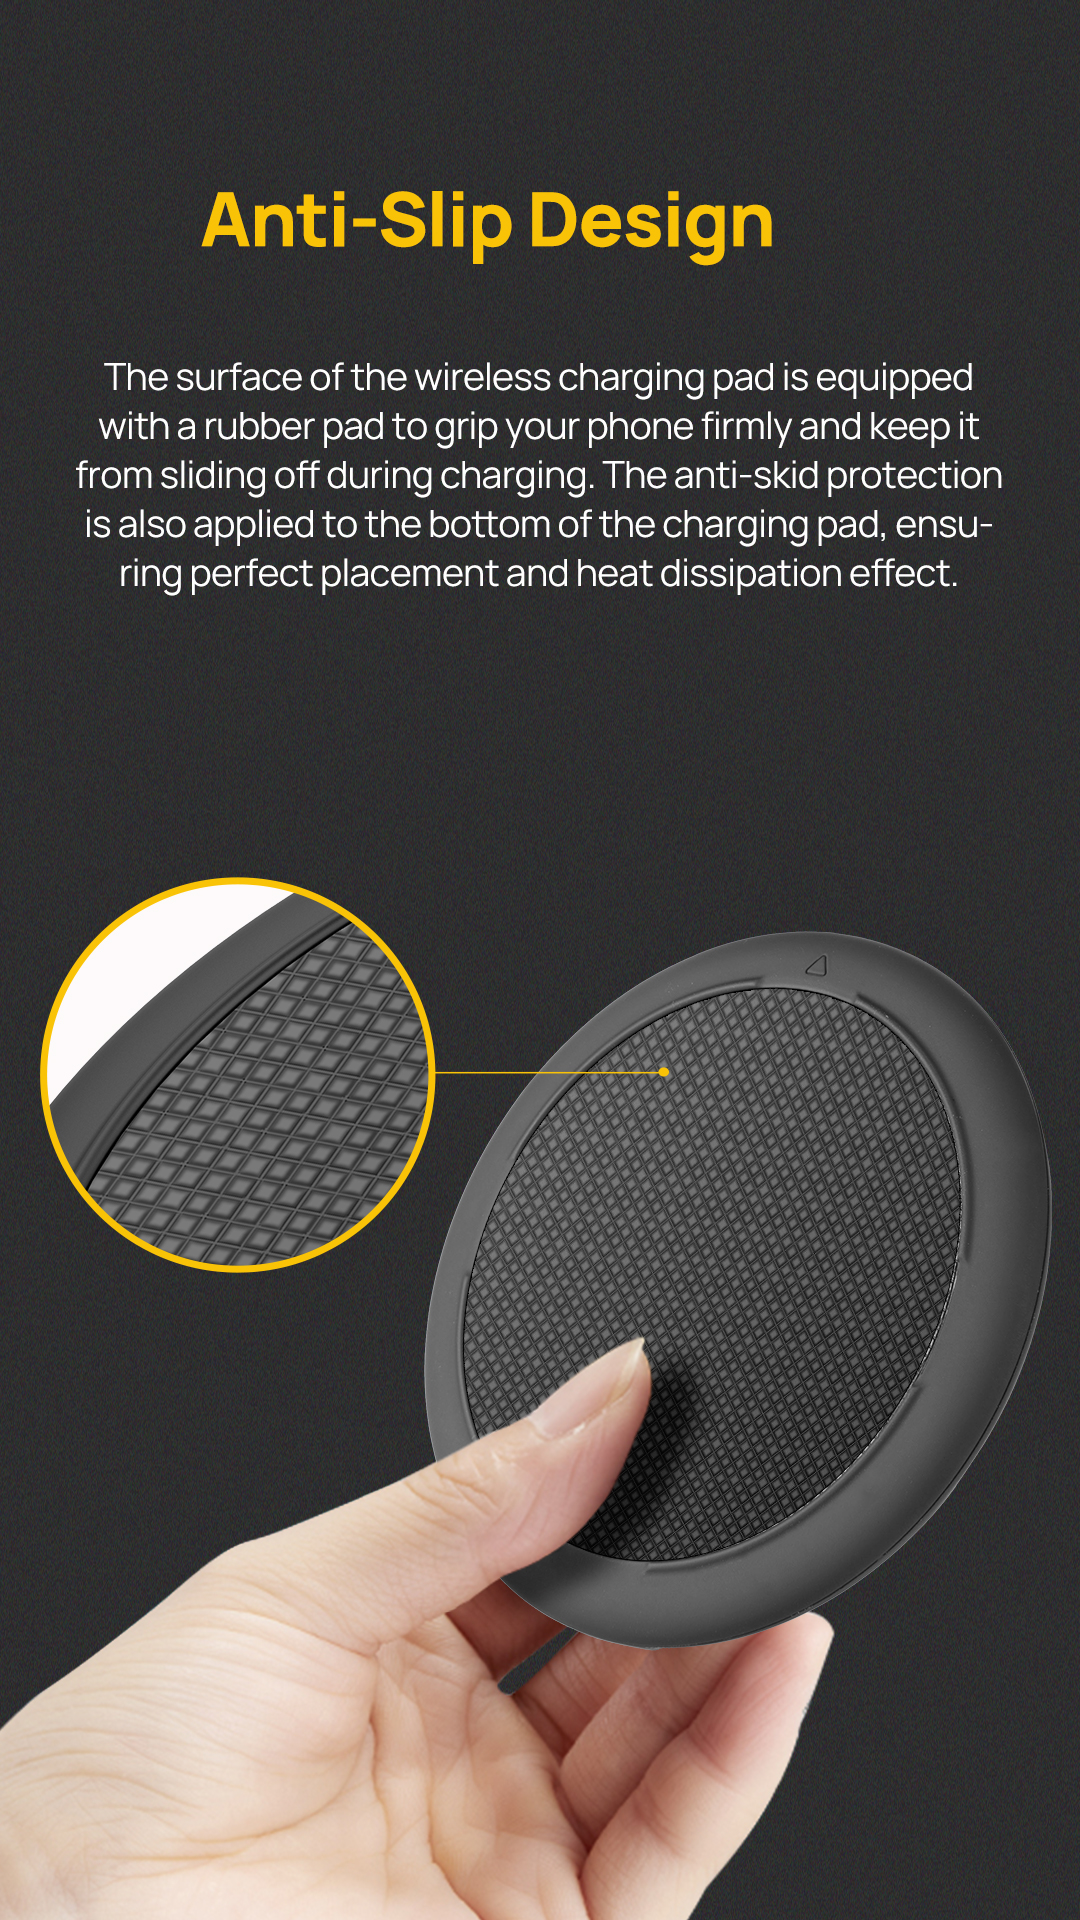 Ulefone-UF003-EPP-15W-Wireless-Charger-Quick-Charging-Pad-For-Ulefone-Armor-10-5G-For-iPhone-12-Pro--1818277-5